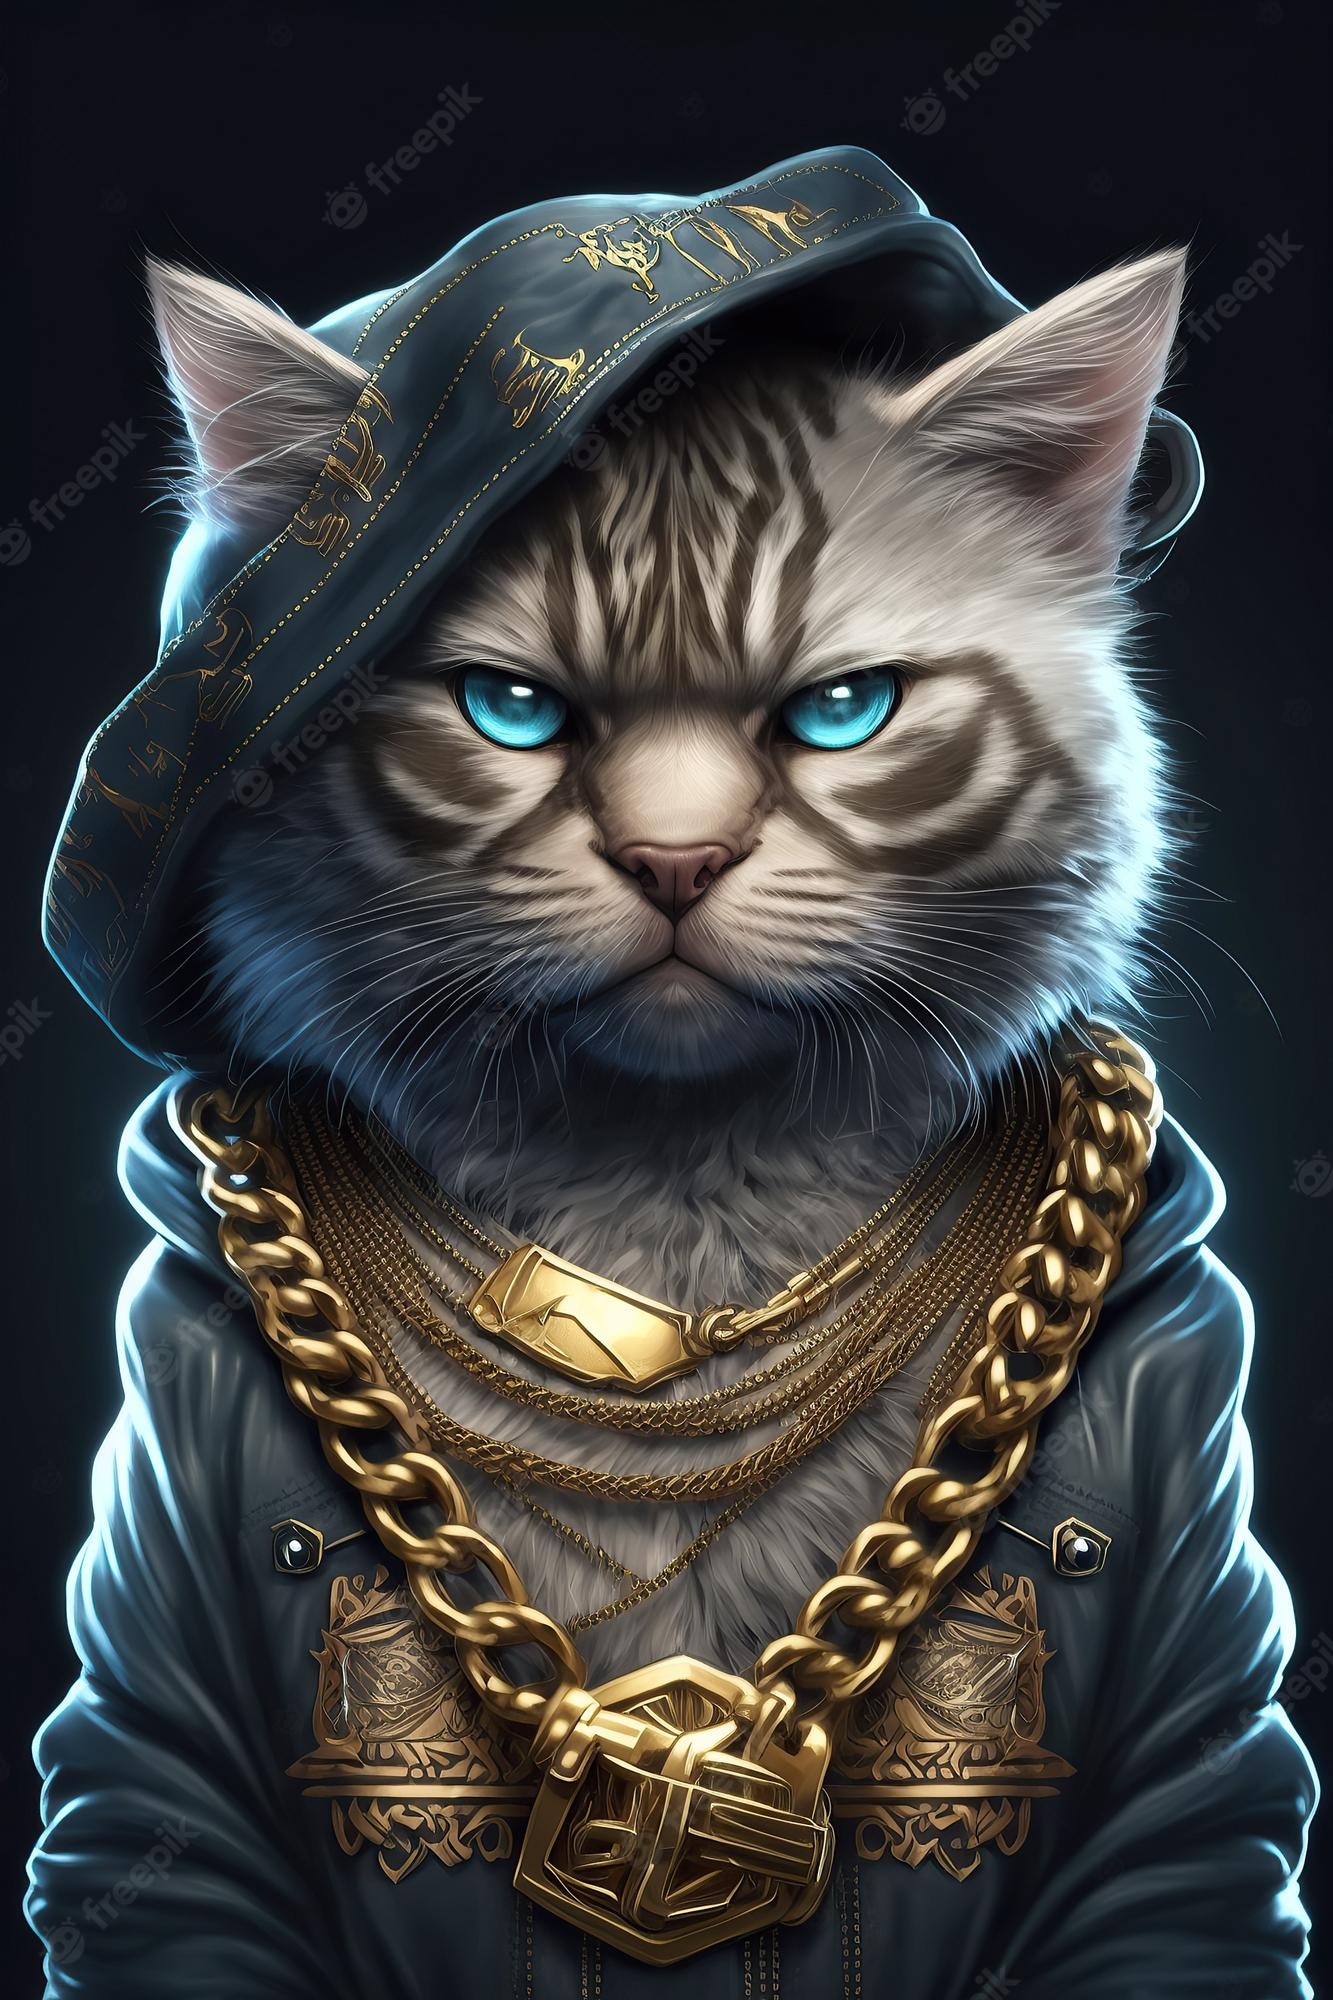 Premium Photo. Cat rapper boss in gangsta style with gold chains thug life concept illustration